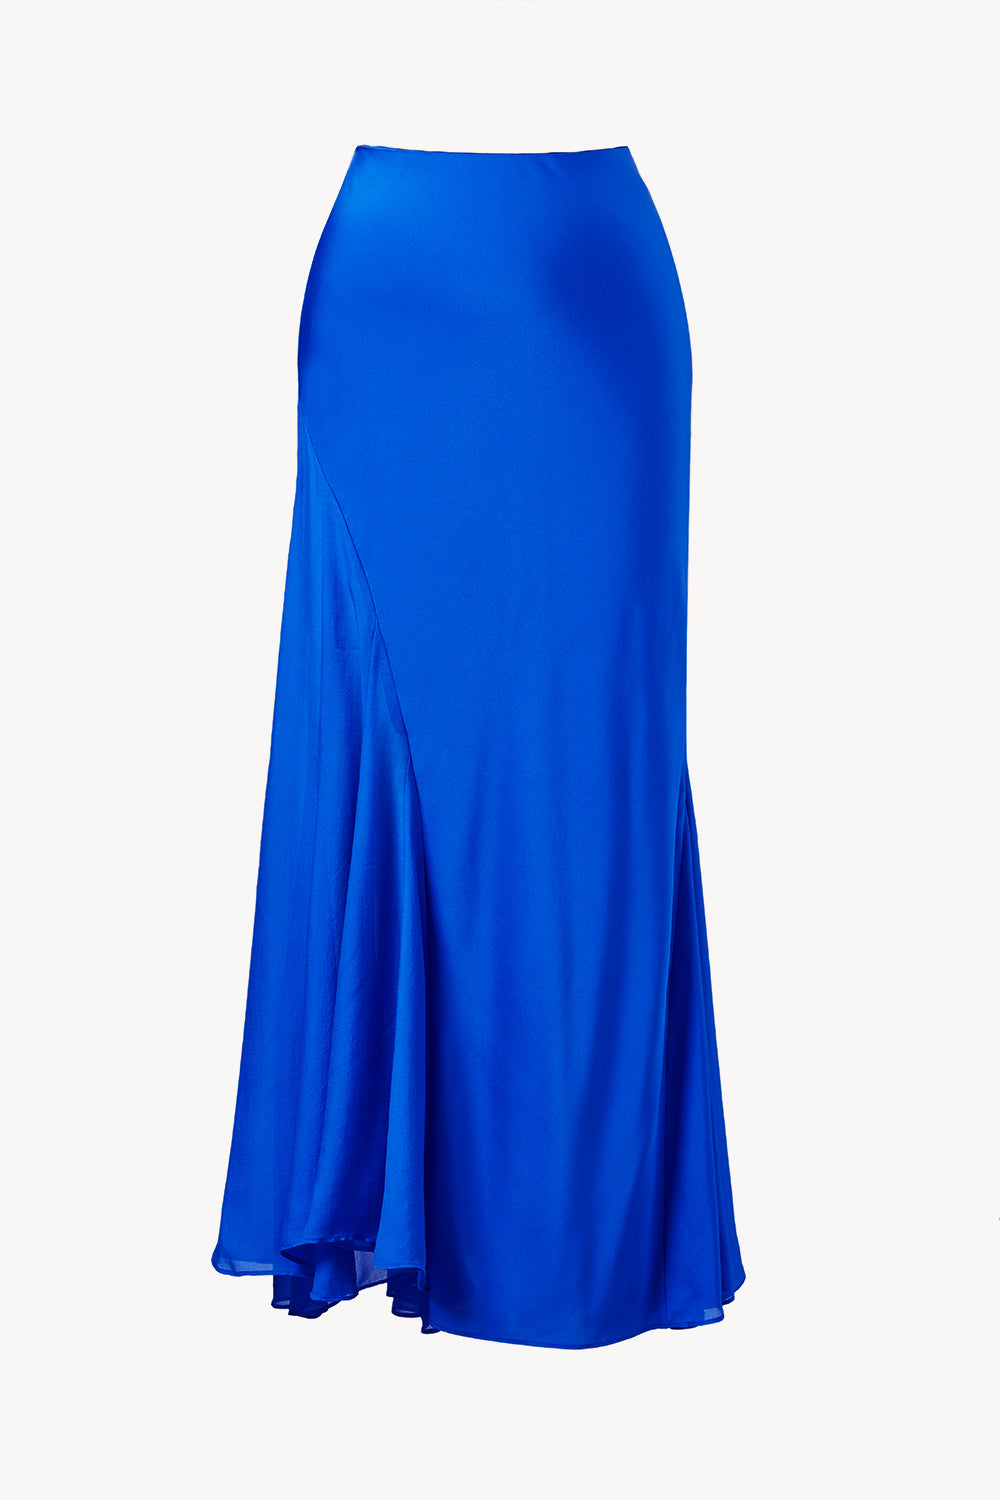 Cate Skirt Deepest Blue · TOVE Studio · Advanced Contemporary ...